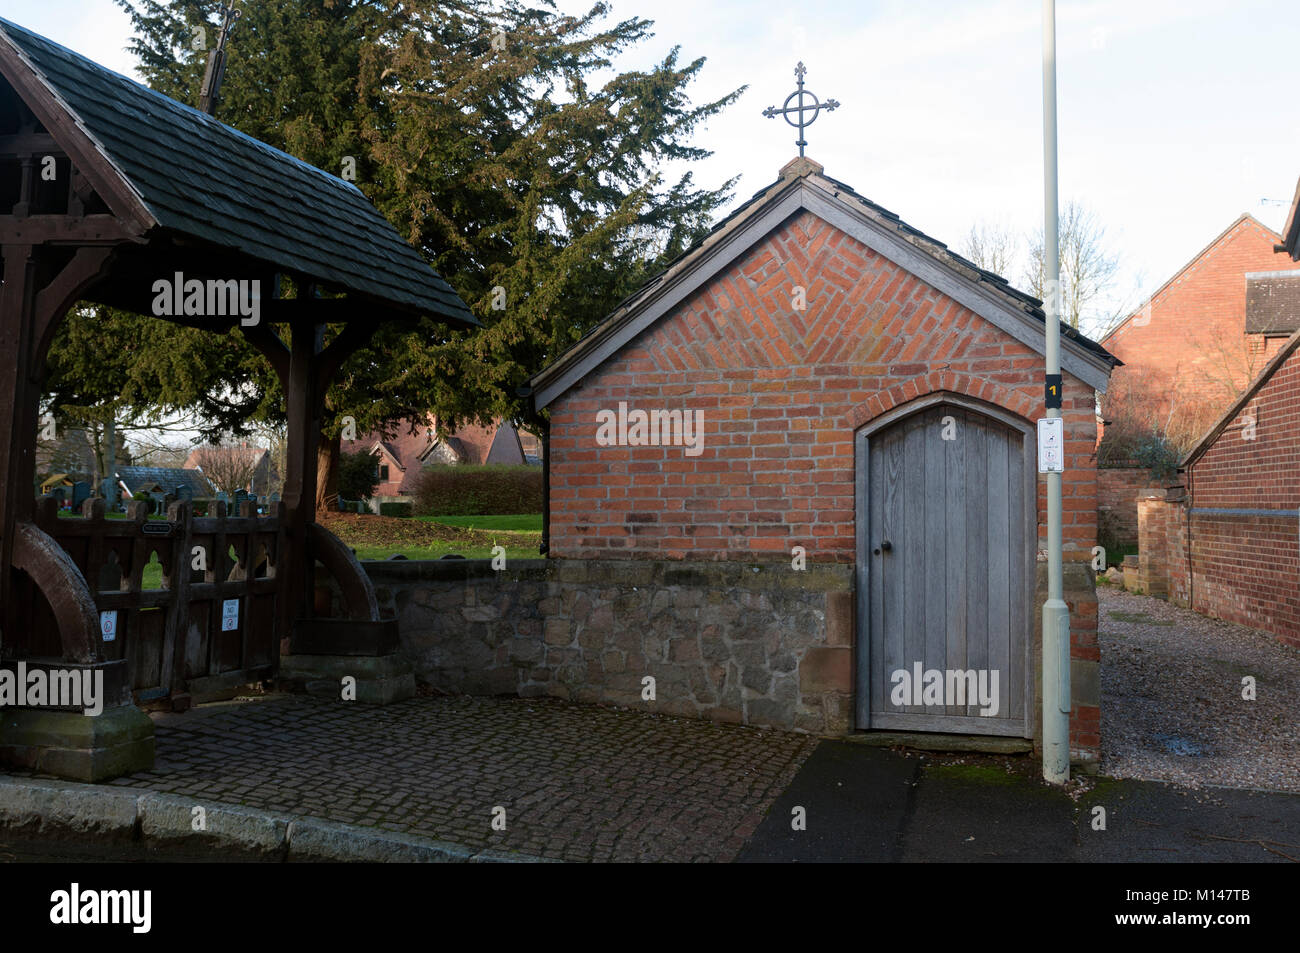 The bier building by All Saints Church, Thurlaston, Leicestershire, England, UK Stock Photo